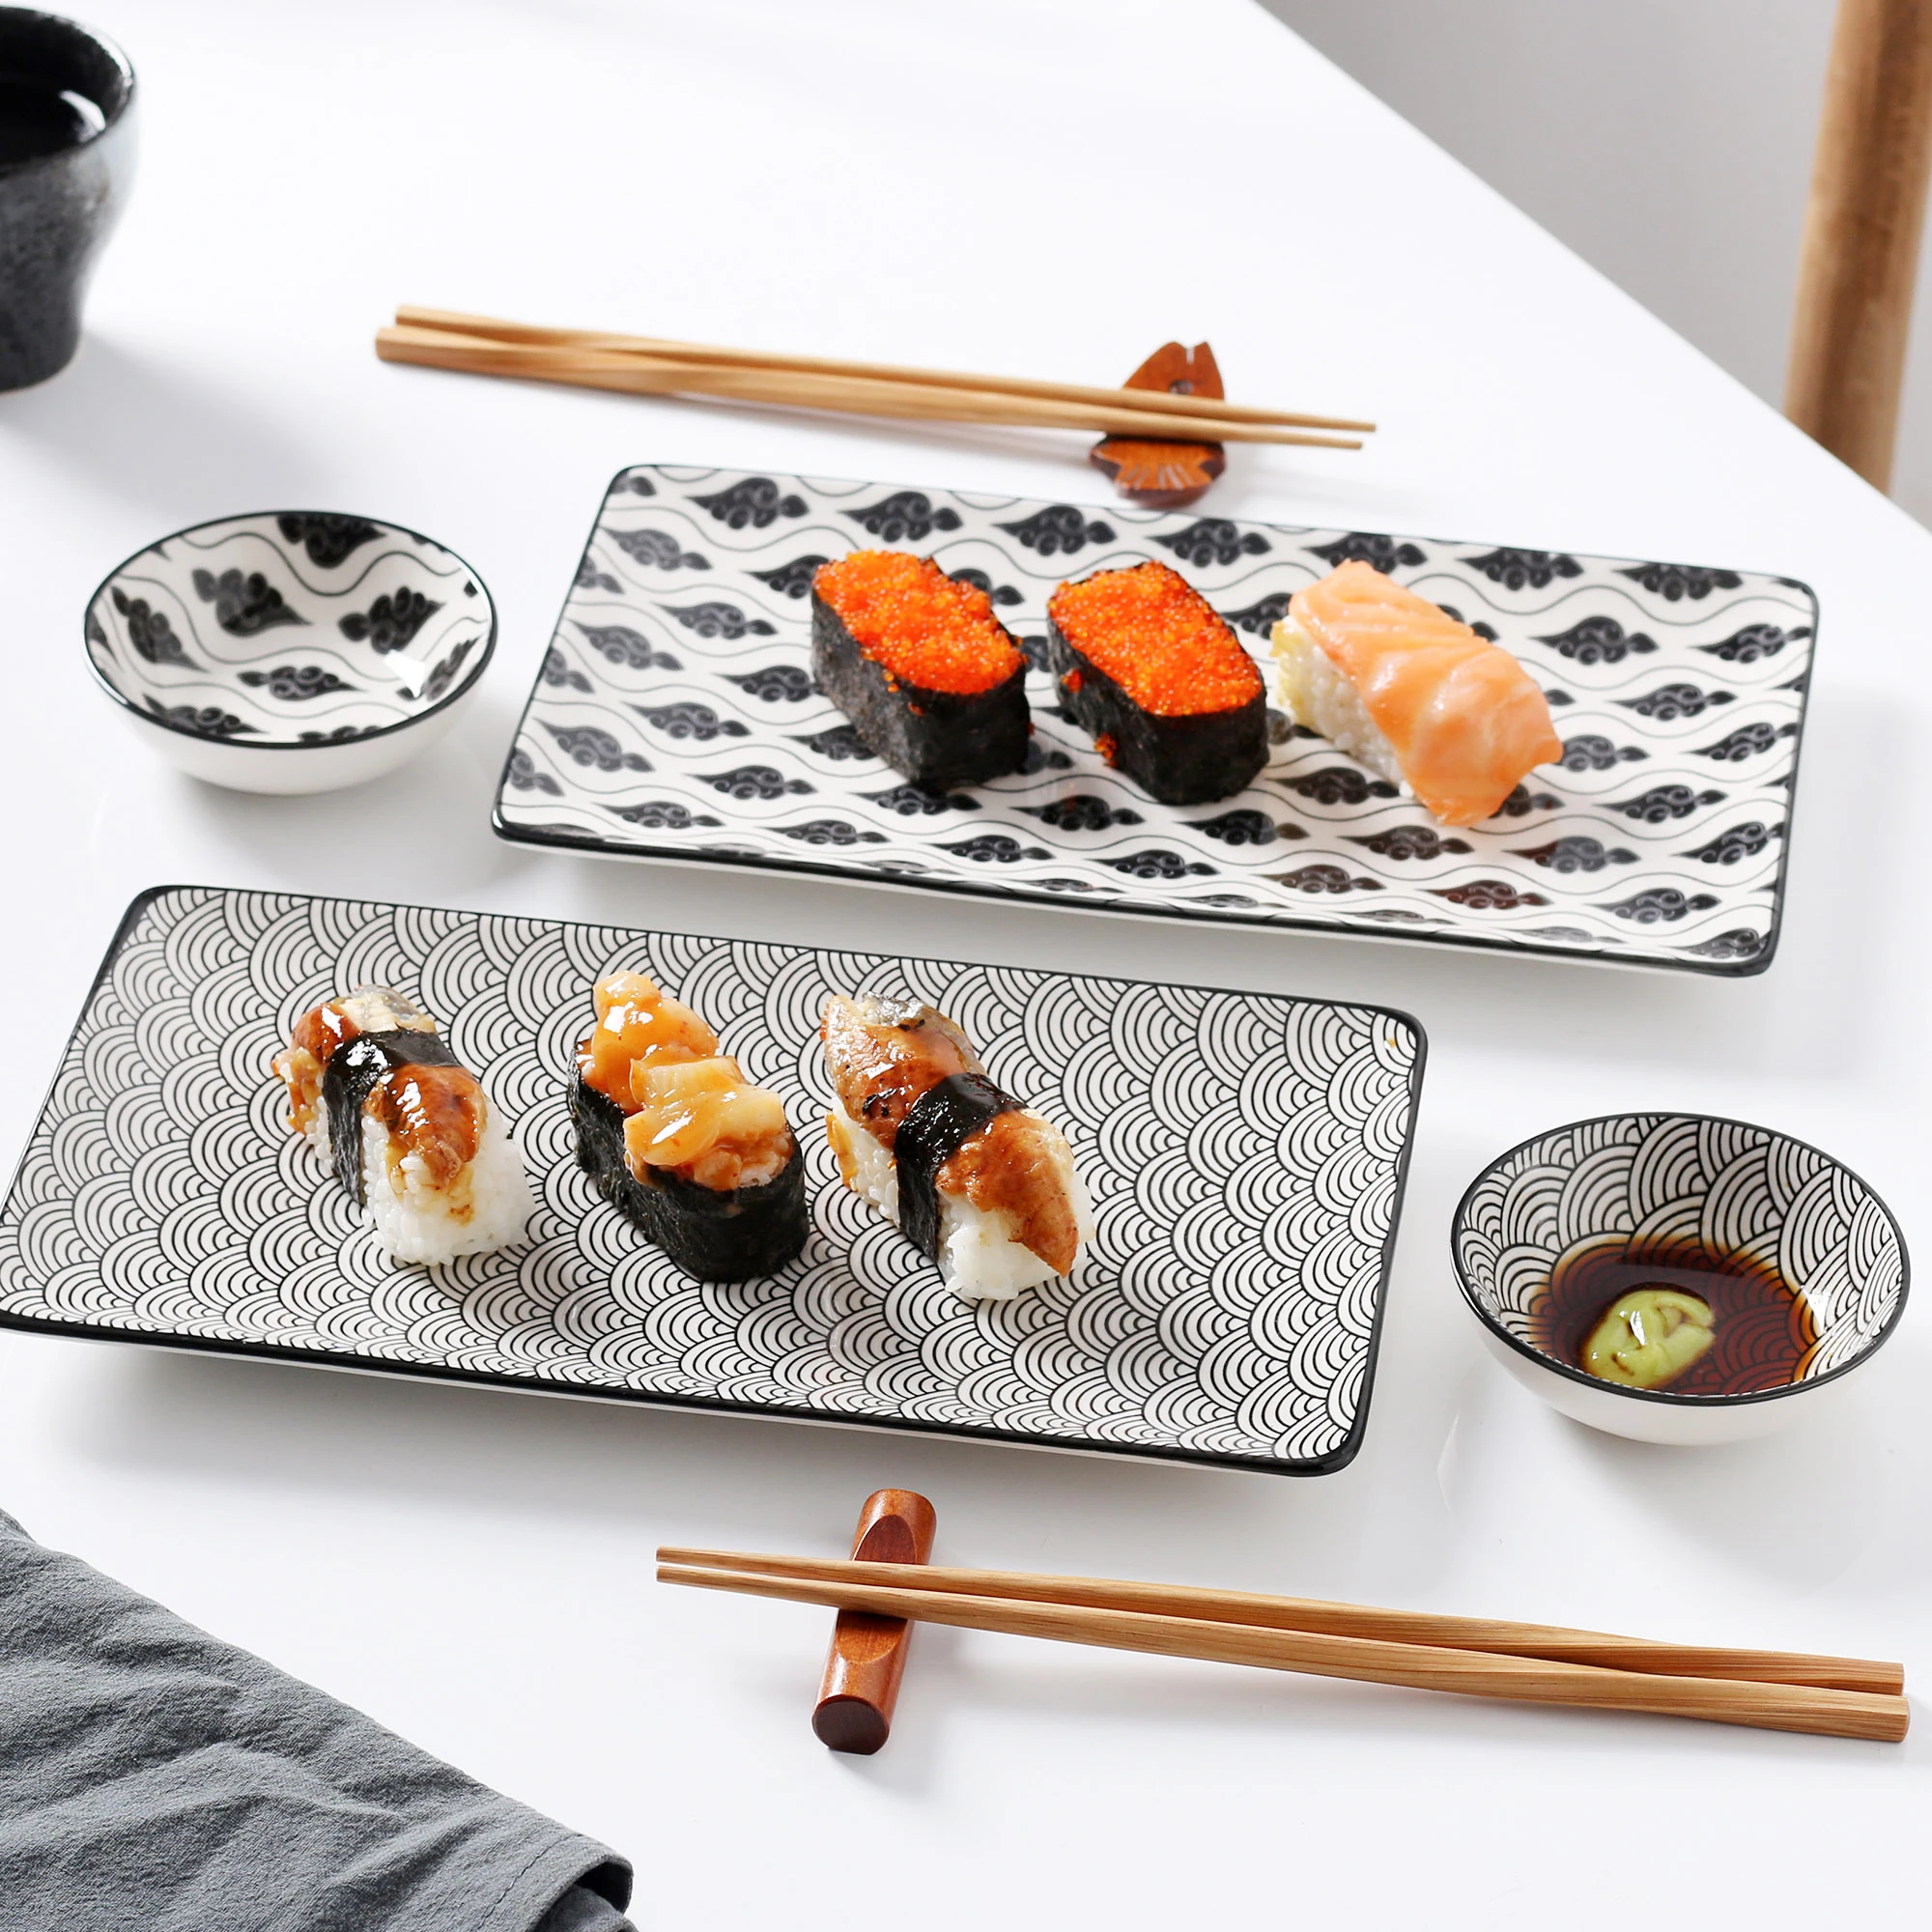 https://ae01.alicdn.com/kf/H9ba36d26232e4d468685e84493cbcaee9/Vancasso-Haruka-Japanese-Style-Porcelain-Sushi-Plate-Set-with-2-Sushi-Plates-Dipping-Dishes-2-Pairs.jpg